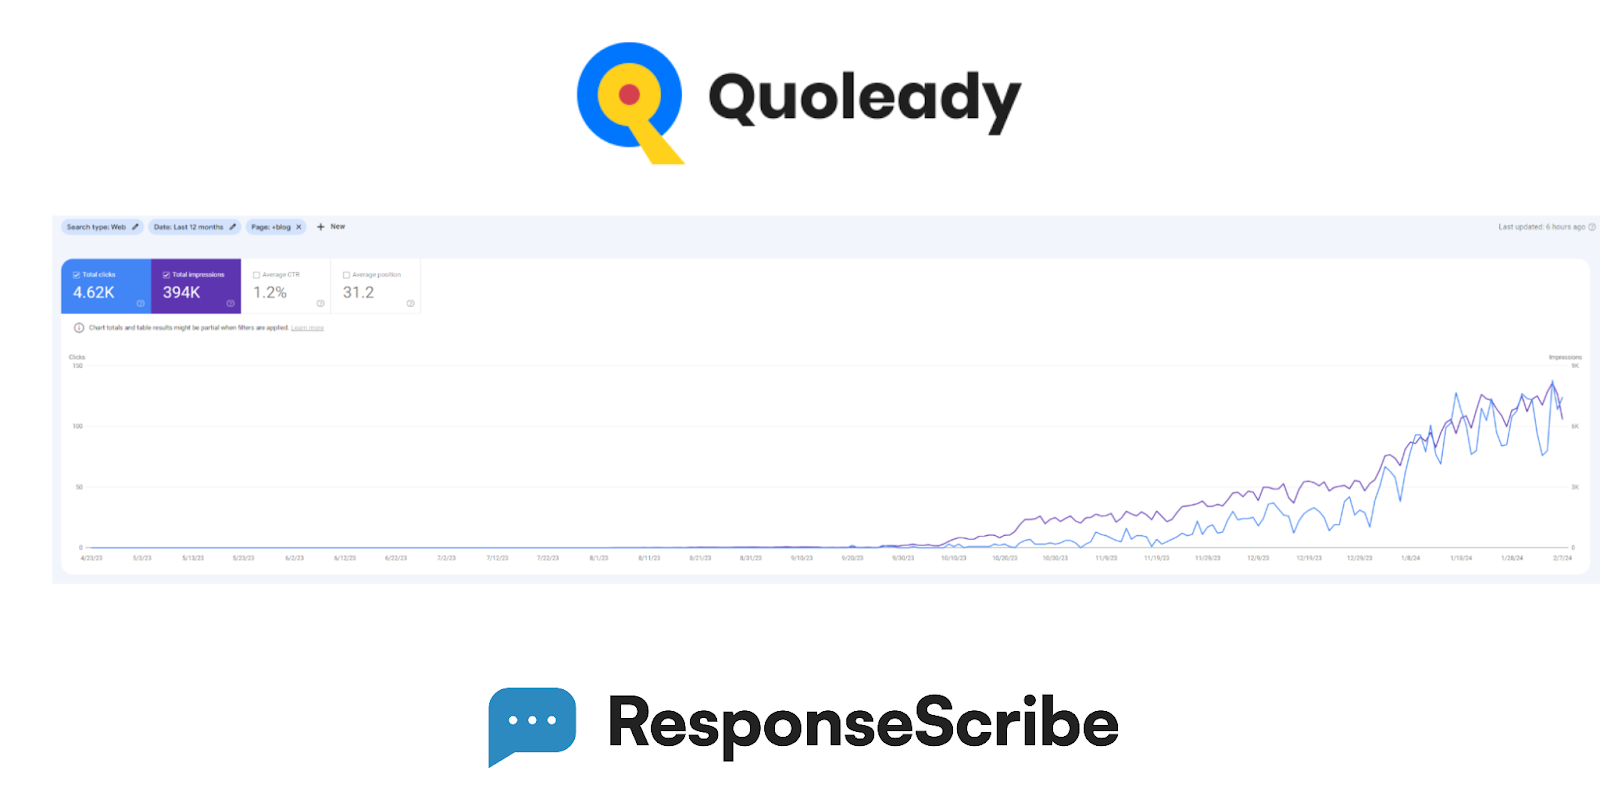 Quoleady and ResponseScribe case study